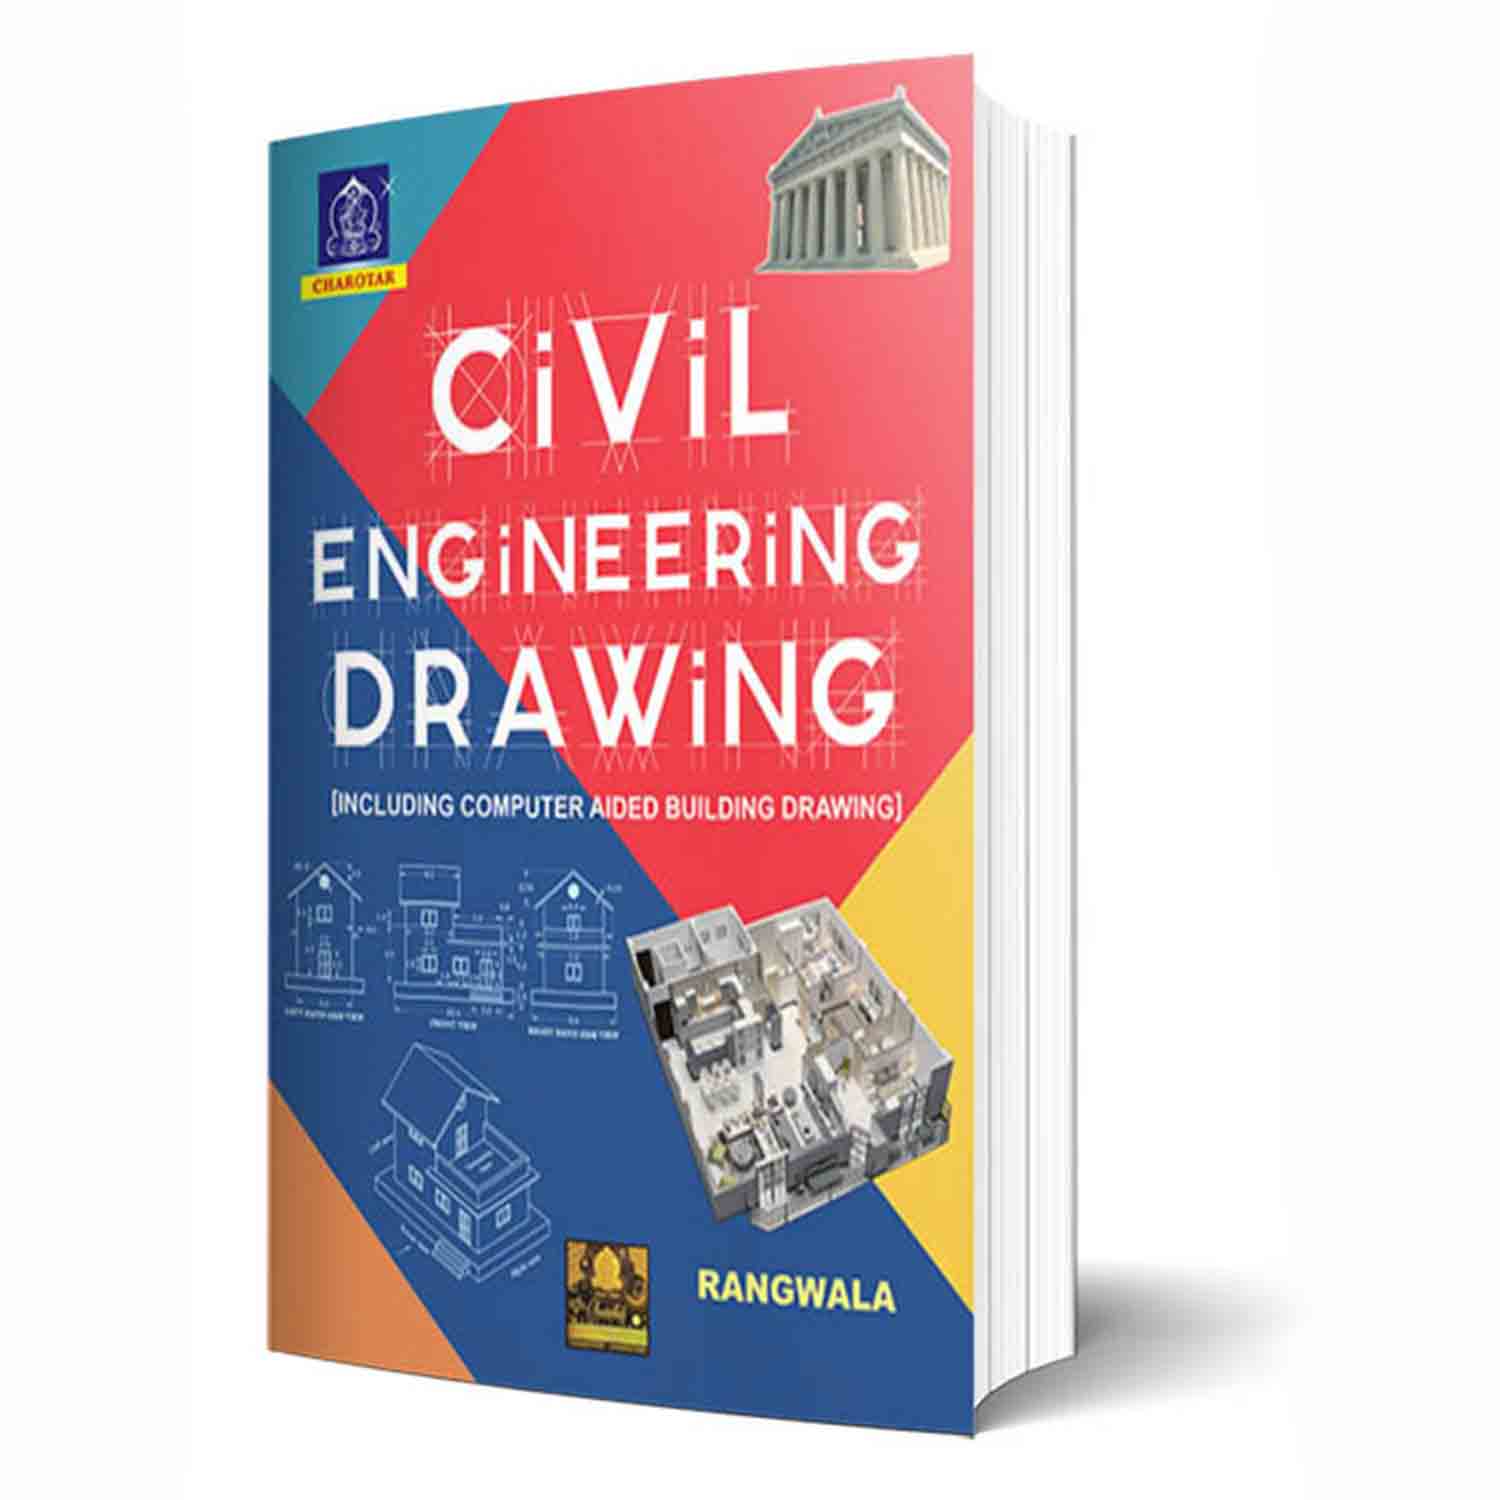 Textbook Of Engineering Drawing: Buy Textbook Of Engineering Drawing by  Shah Prof. P J. at Low Price in India | Flipkart.com